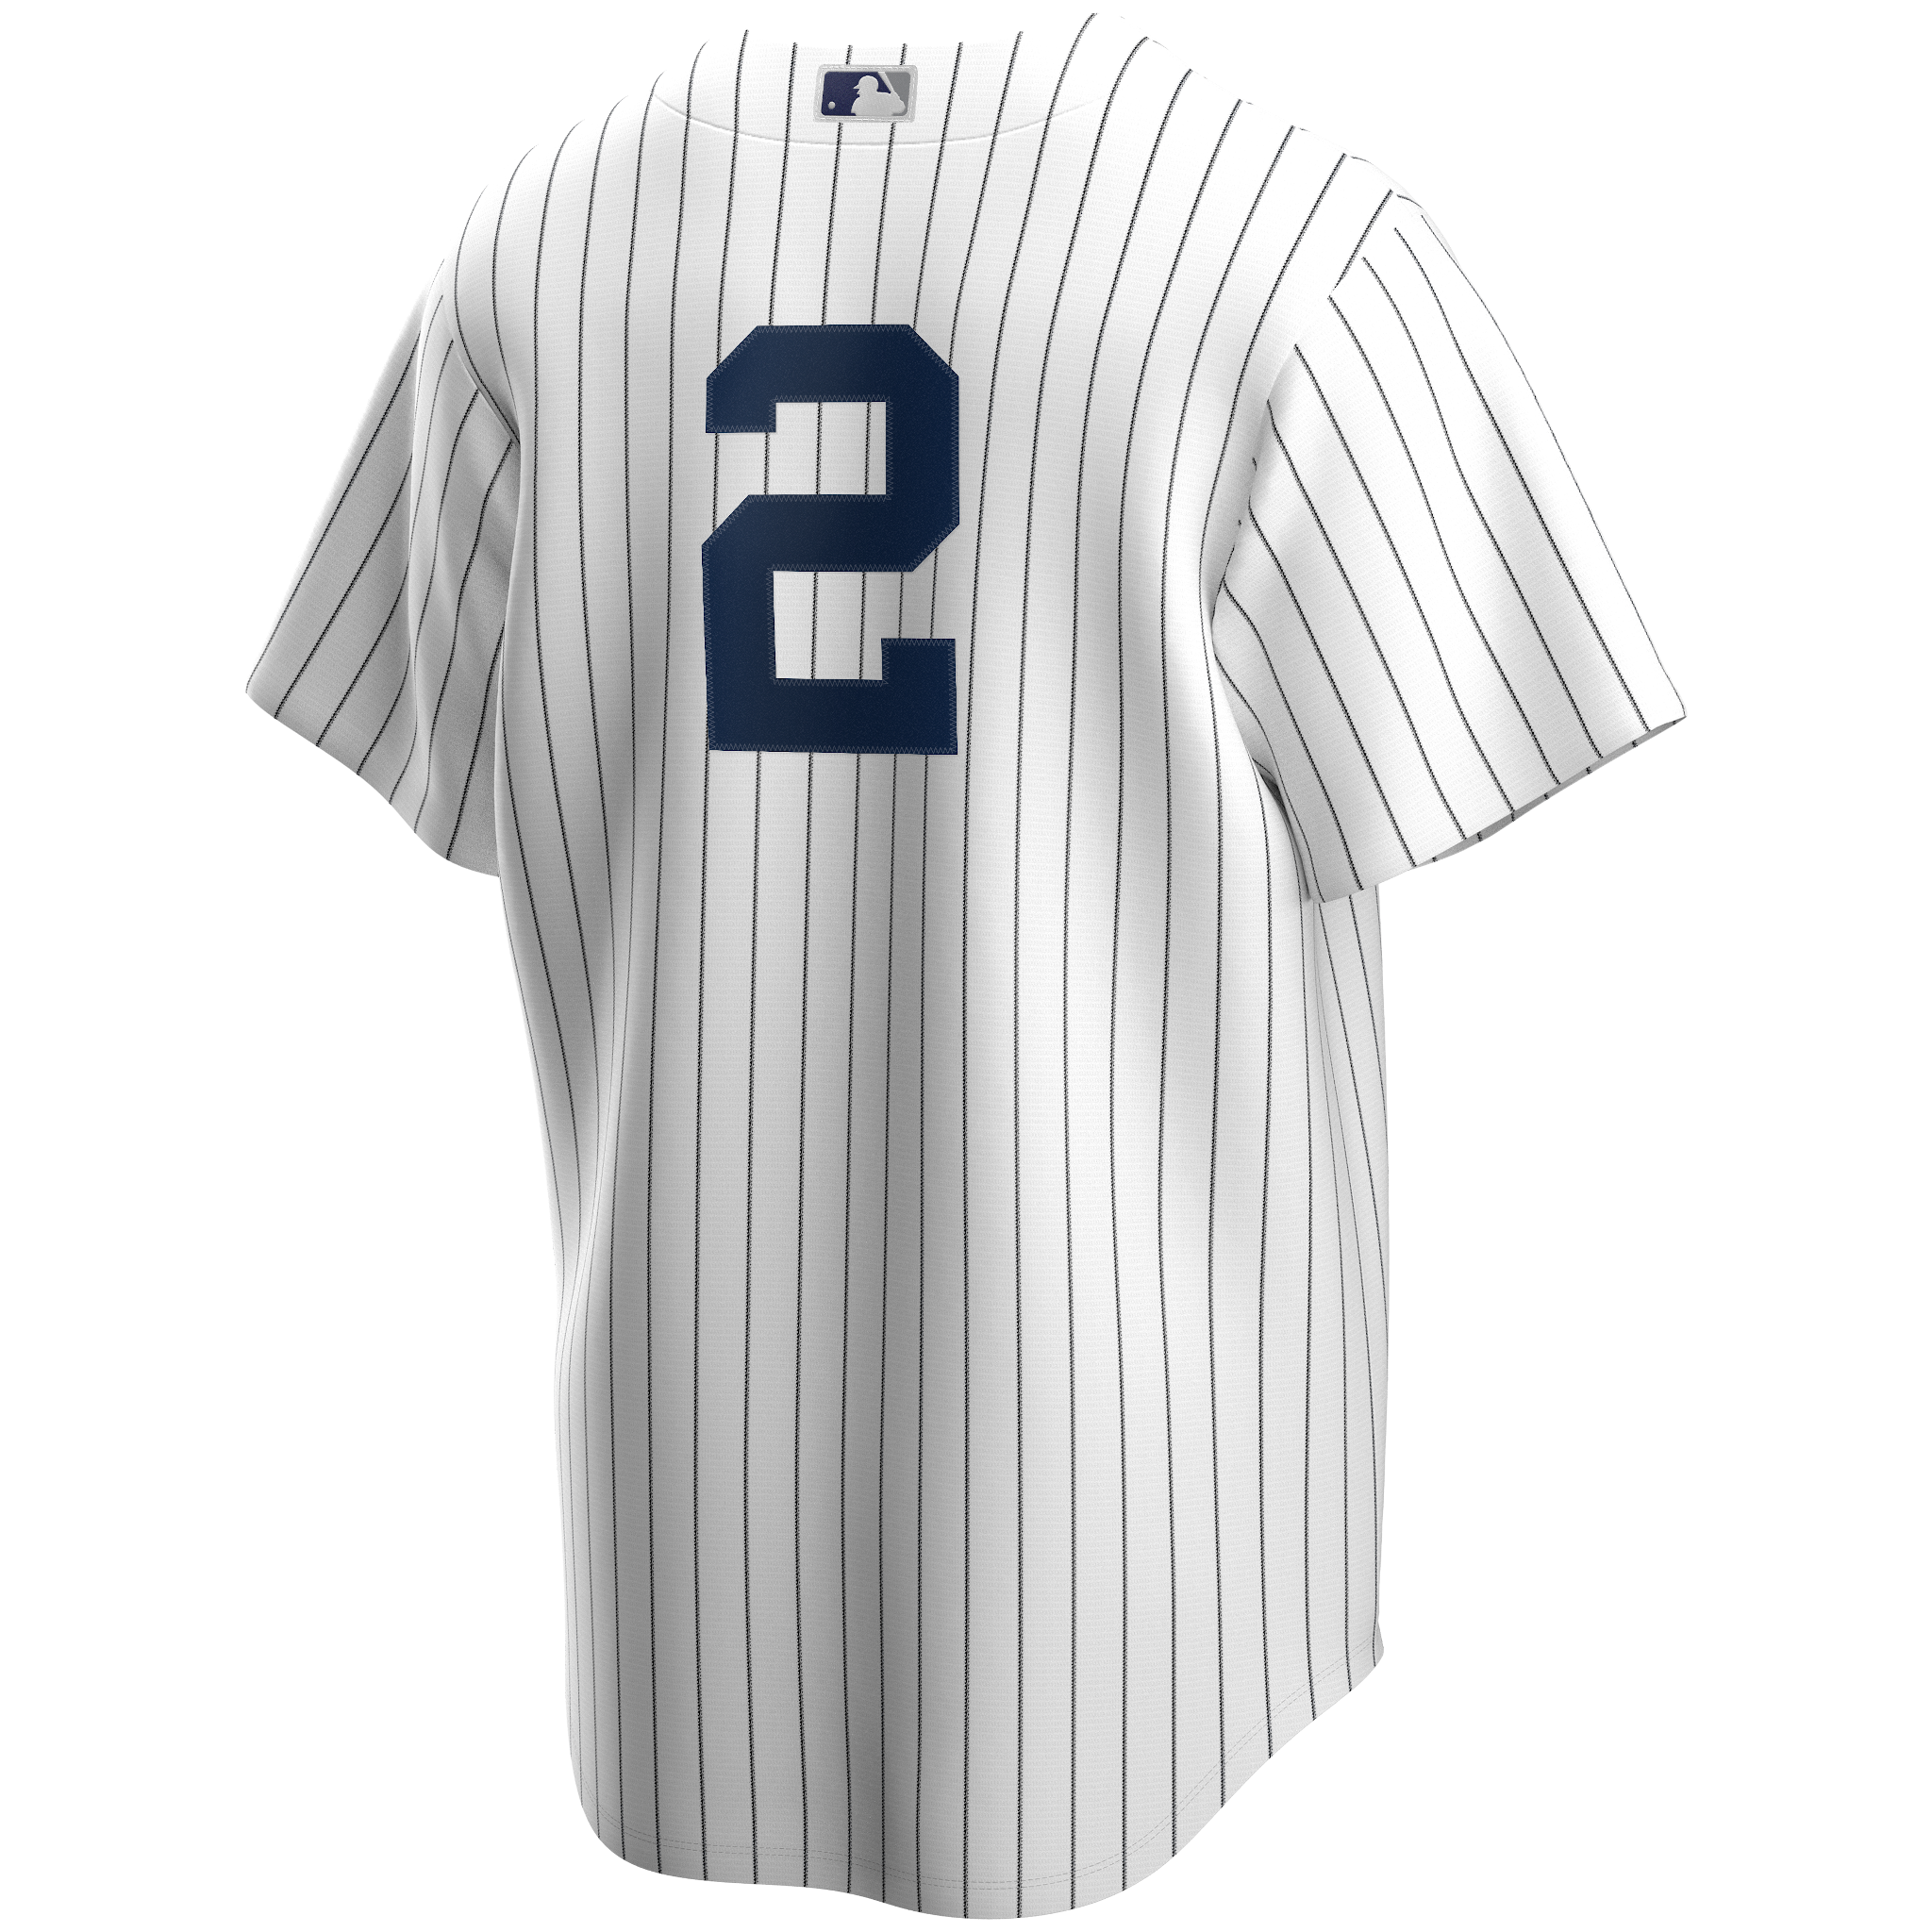 Nwt Derek Jeter New York Yankees White Home Jersey Stitched Size Adult 3xl